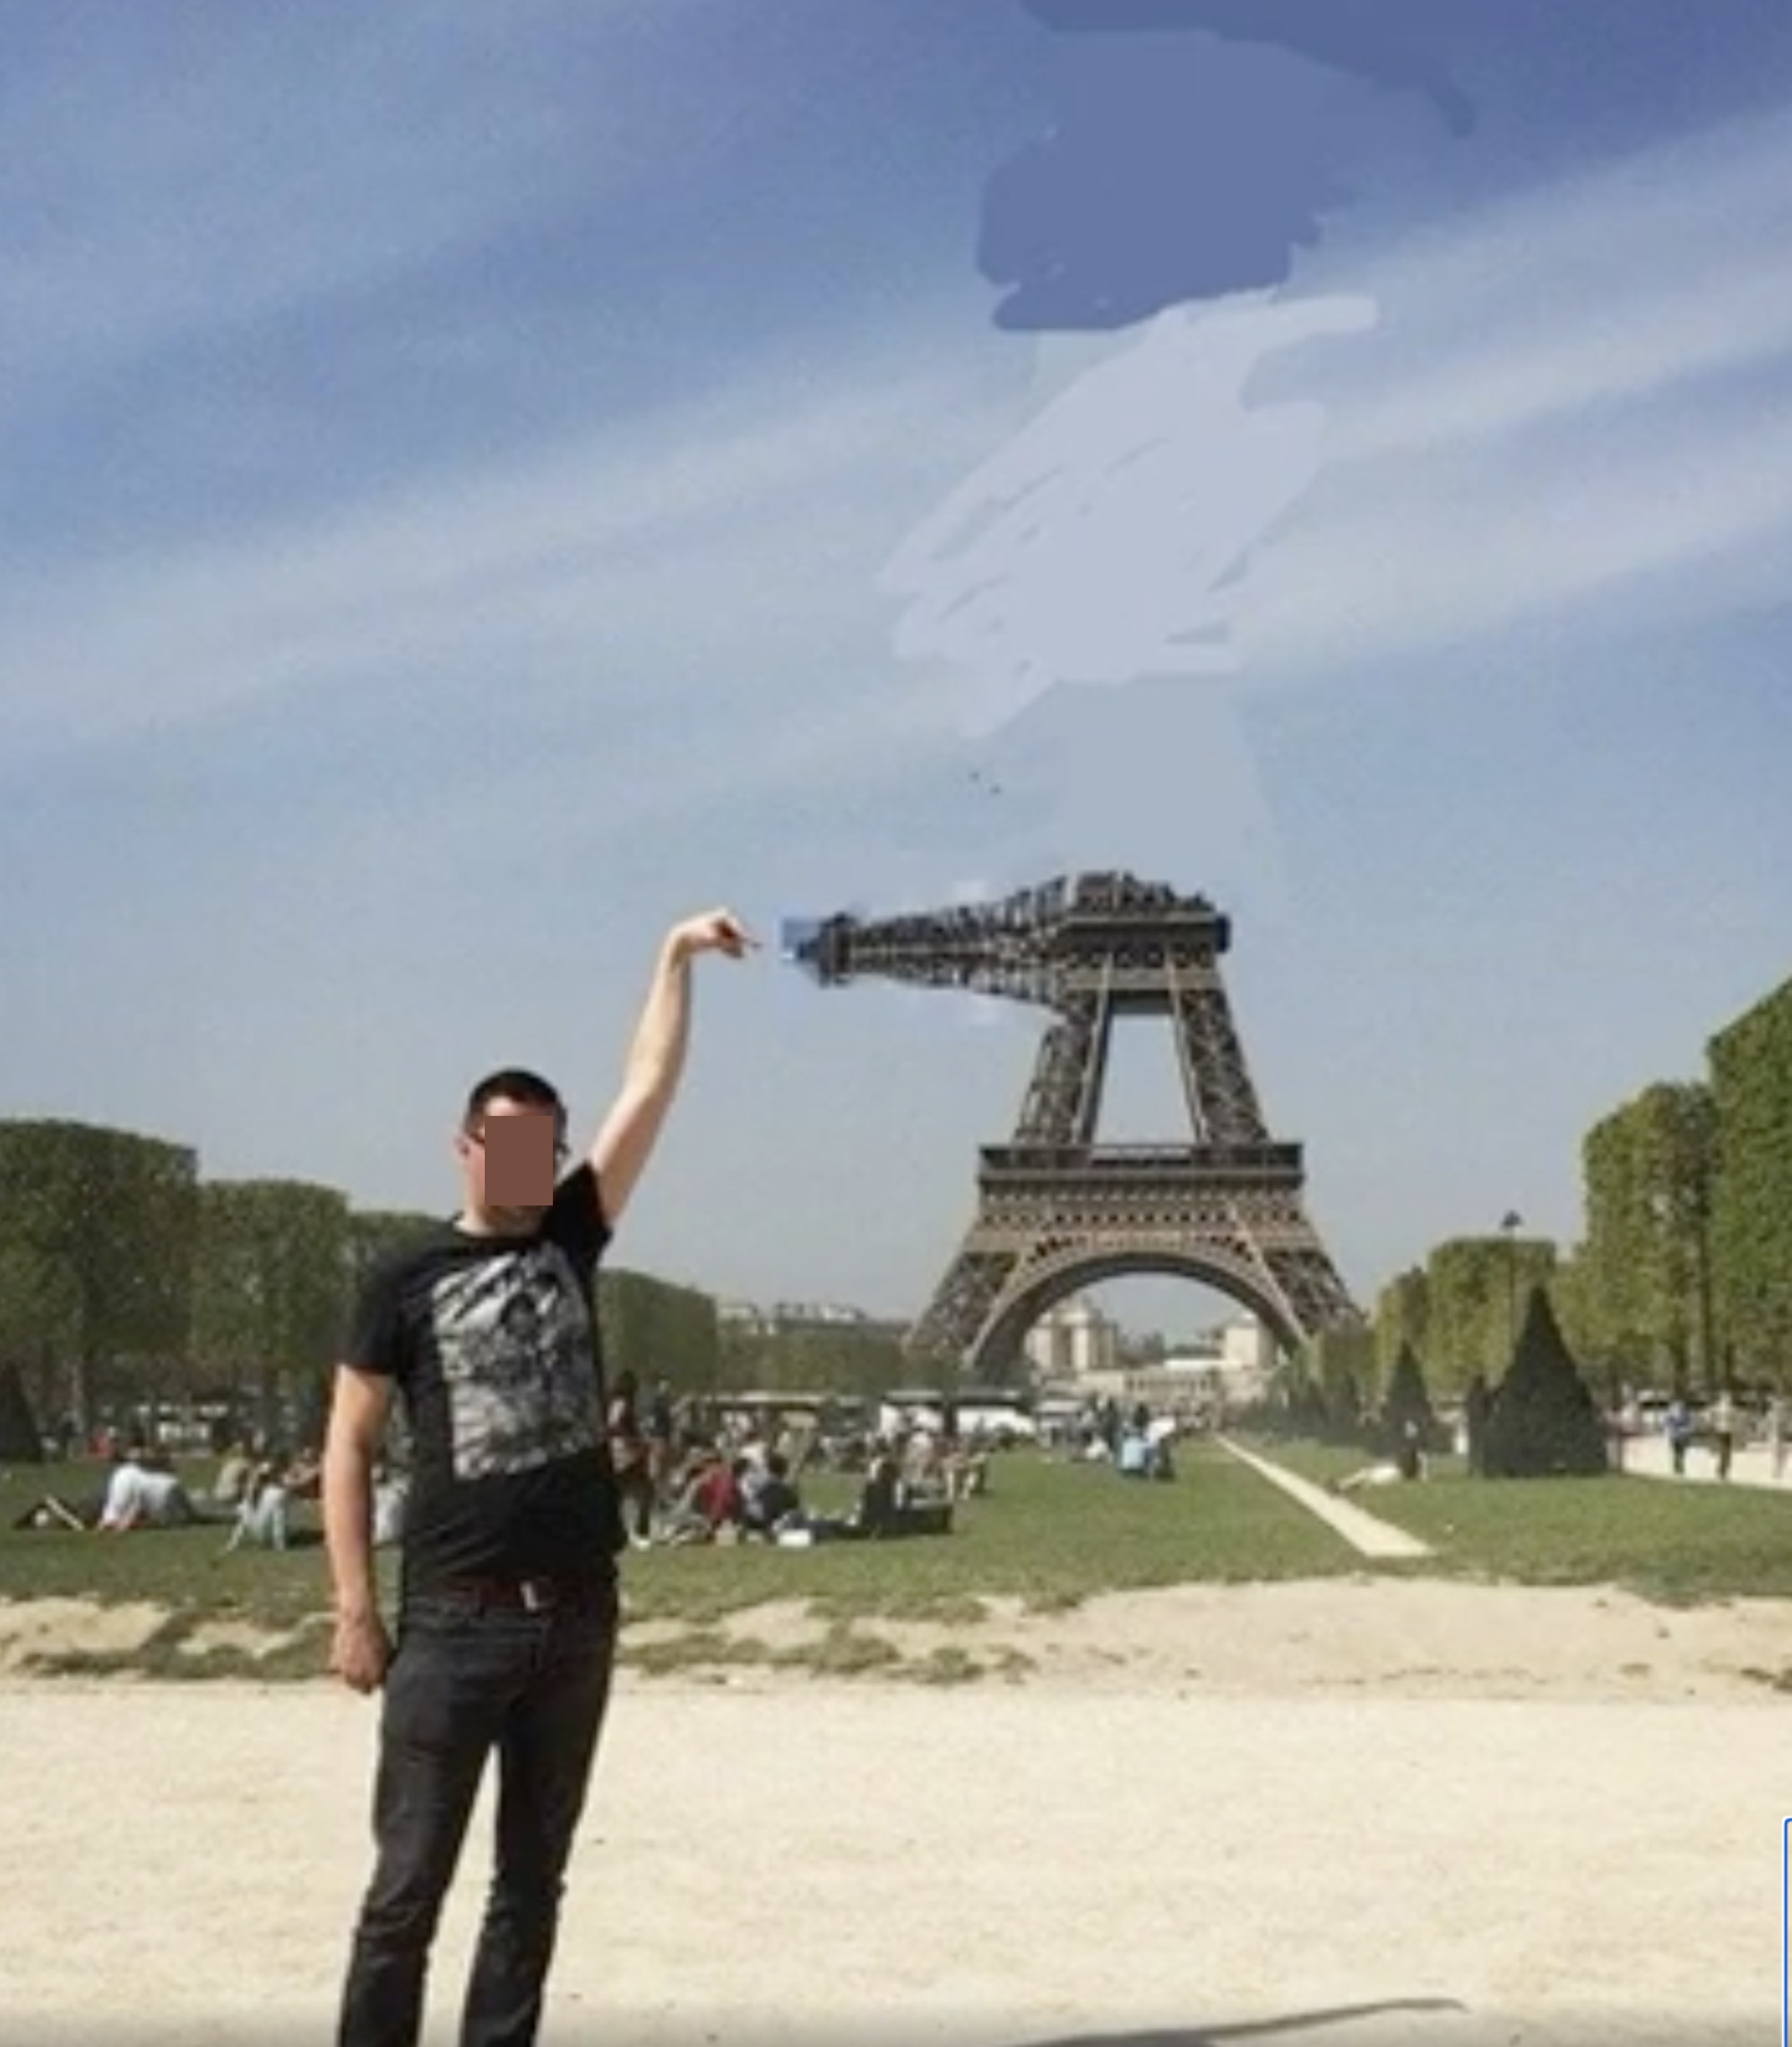 A Photoshopped image of the Eiffel Tower